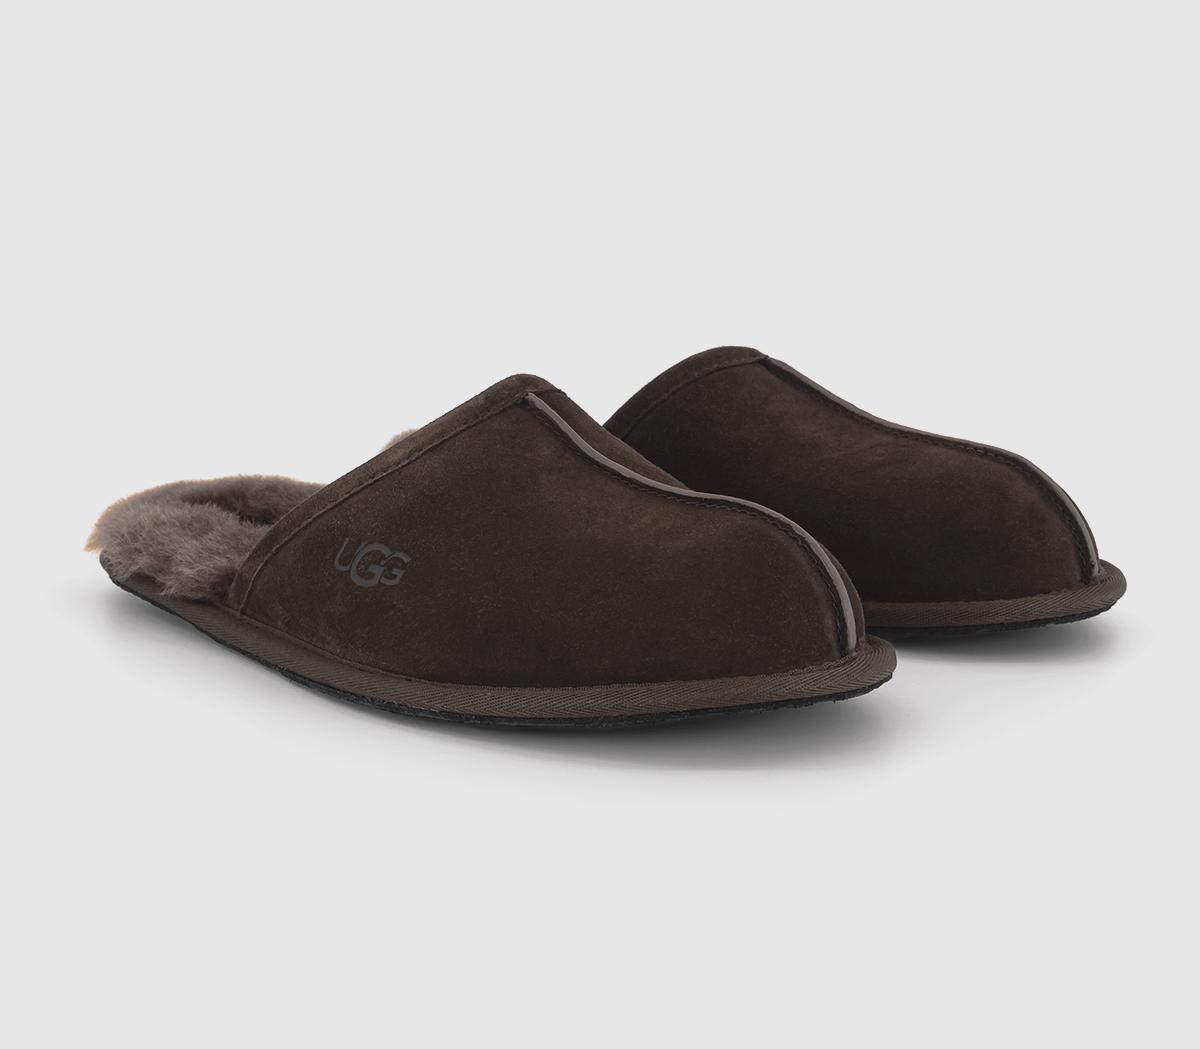 UGG Mens Scuff Slippers Dusted Cocoa Brown, 7